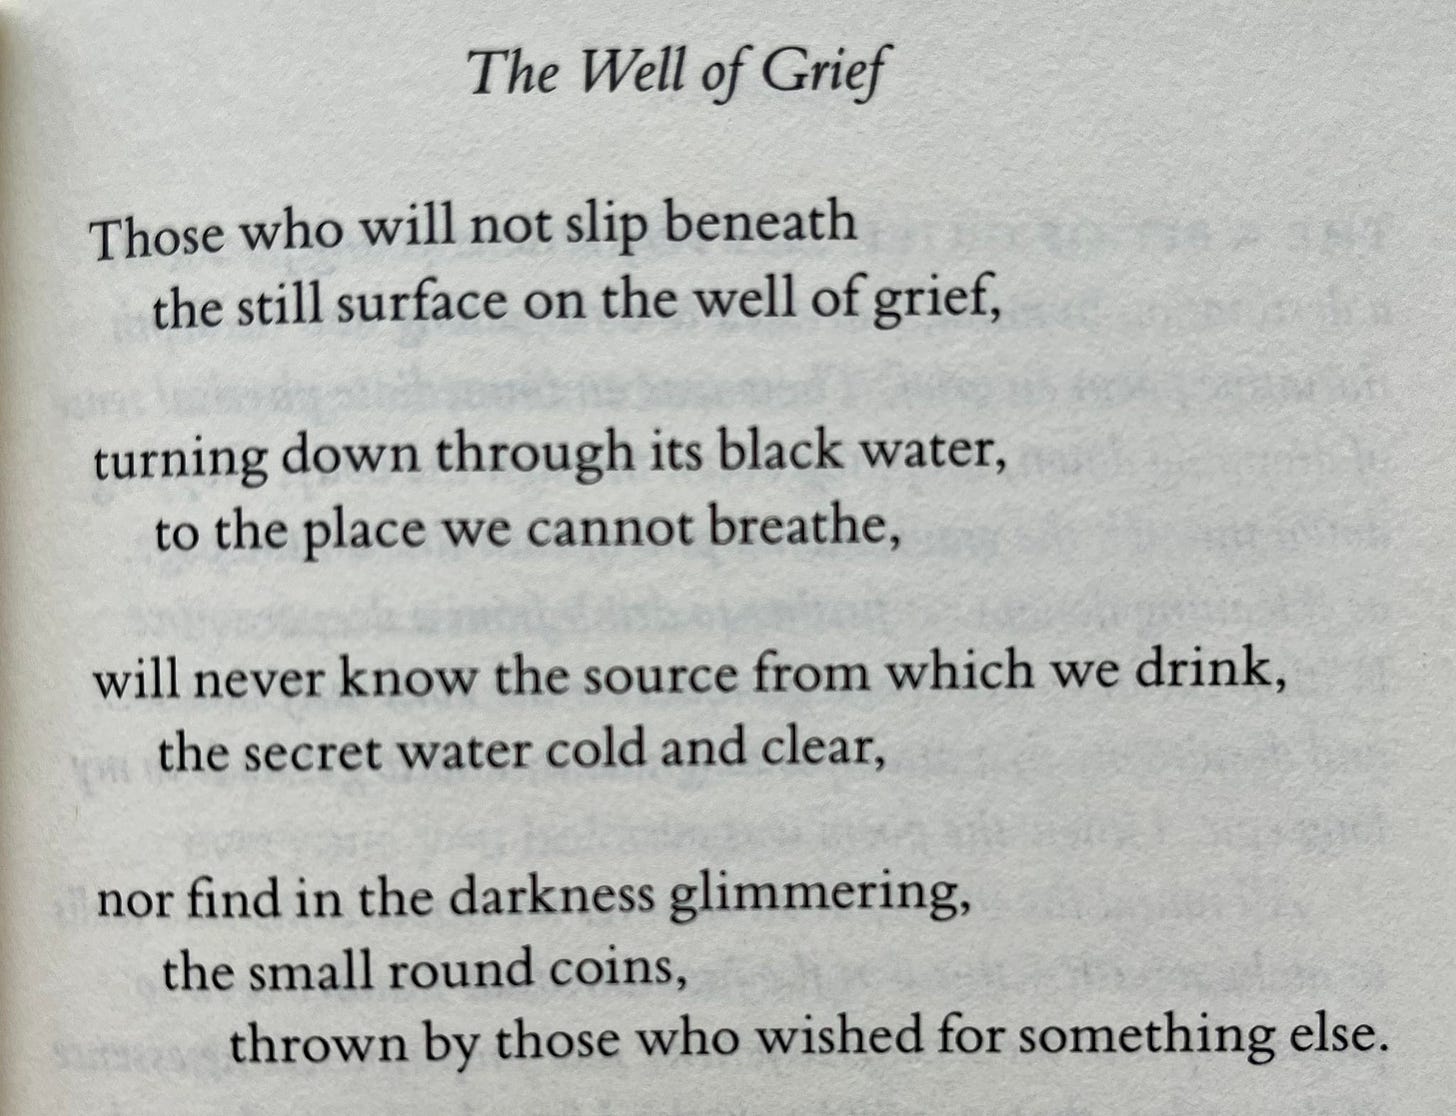 Dan on X: "The Well of Grief by David Whyte https://t.co/qfFViwLR6Y" / X